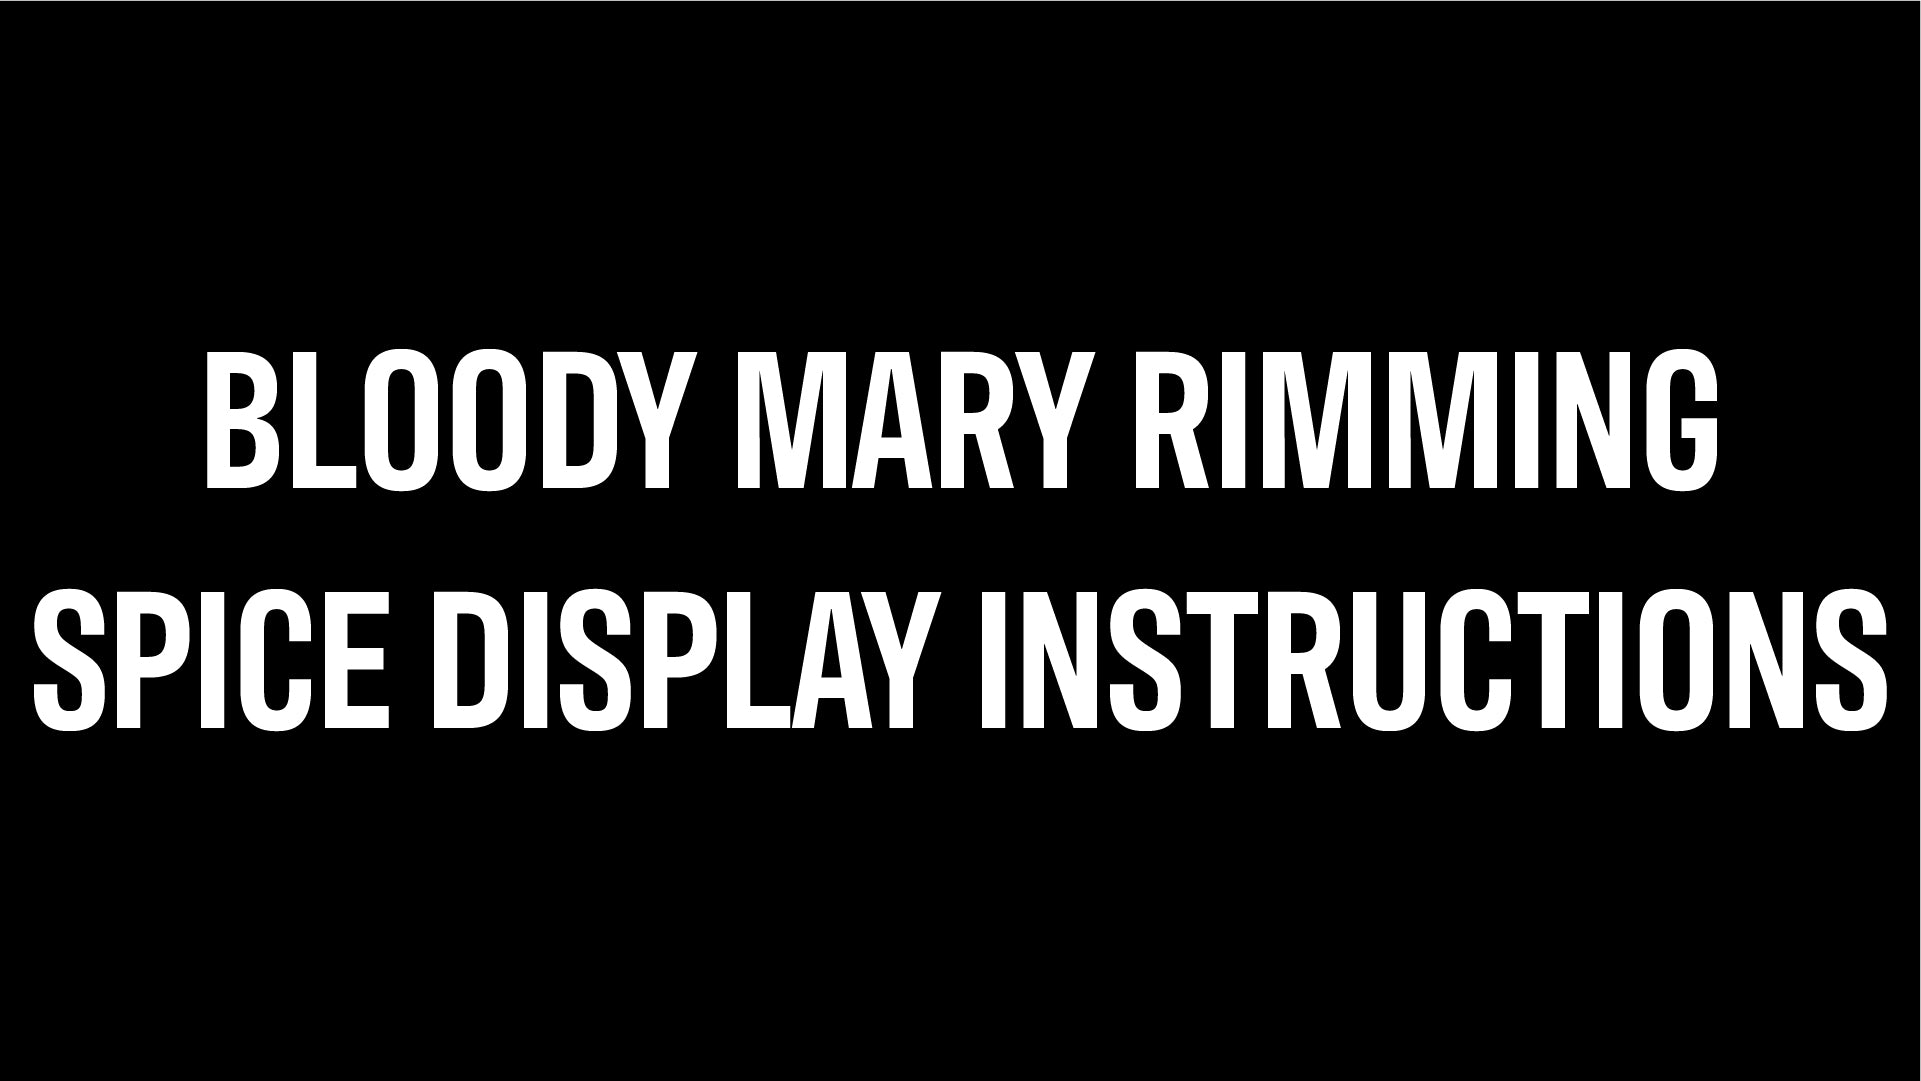 Bloody Mary Rimming Spice Display Instructions